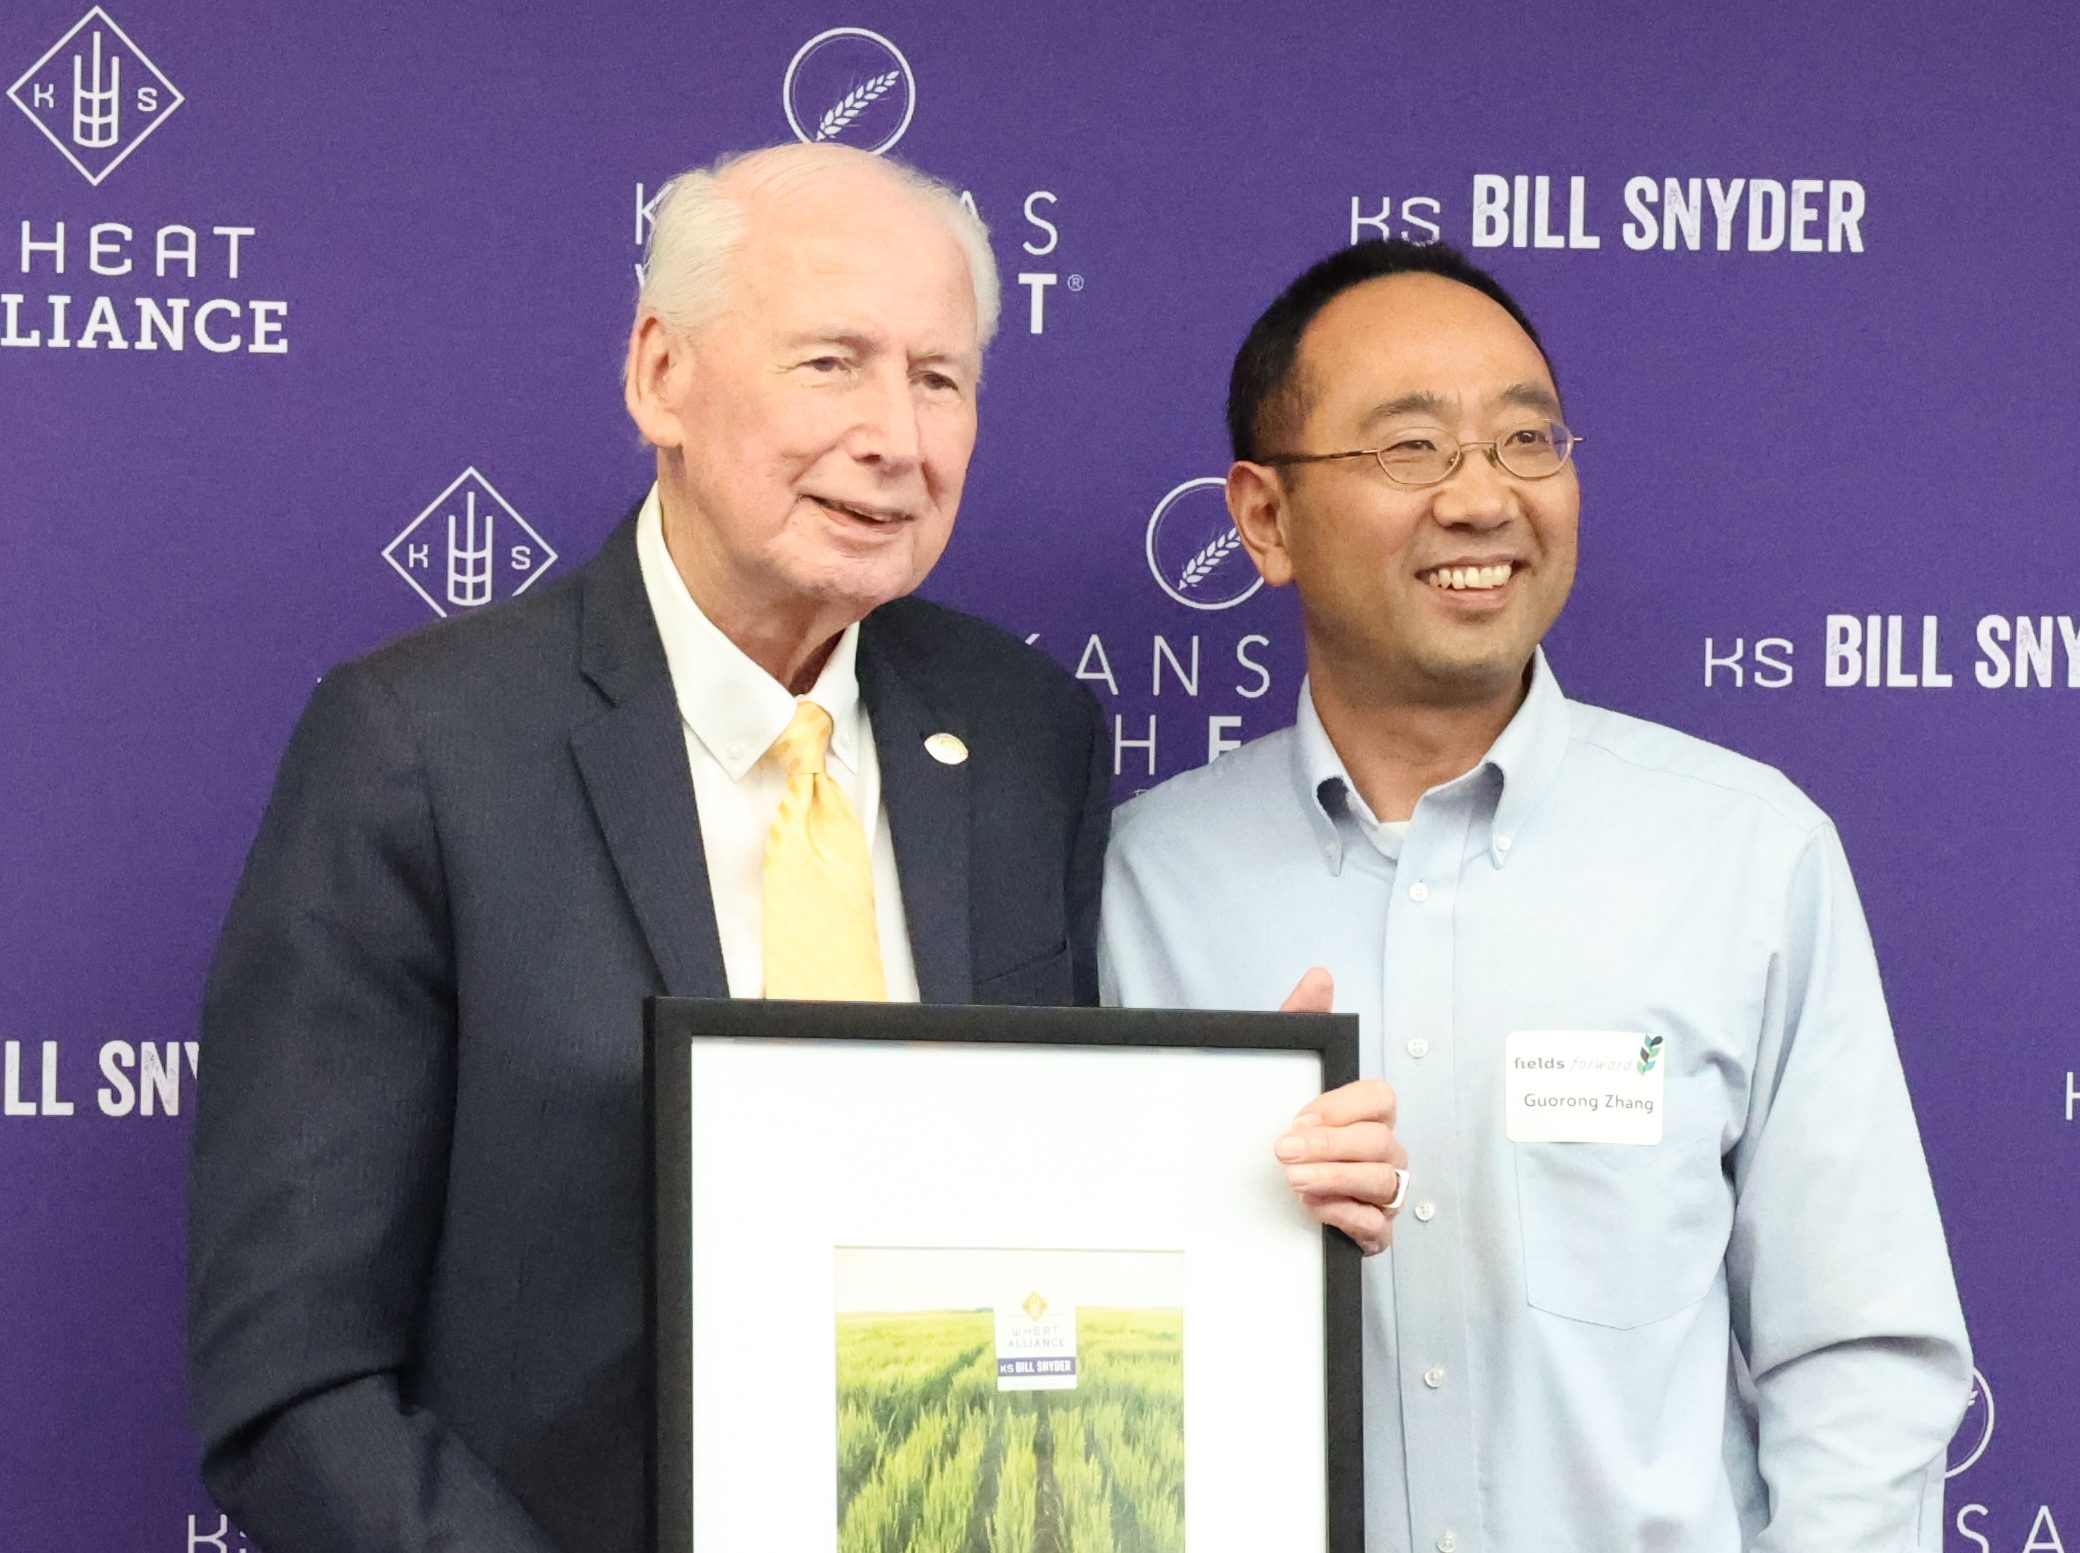 Wheat breeder Guorong Zhang developed the KS Bill Snyder wheat variety, using parents from the Hays and Manhattan breeding programs. He is pictured with the variety’s namesake, Coach Bill Snyder. (Photo by Bill Spiegel.)